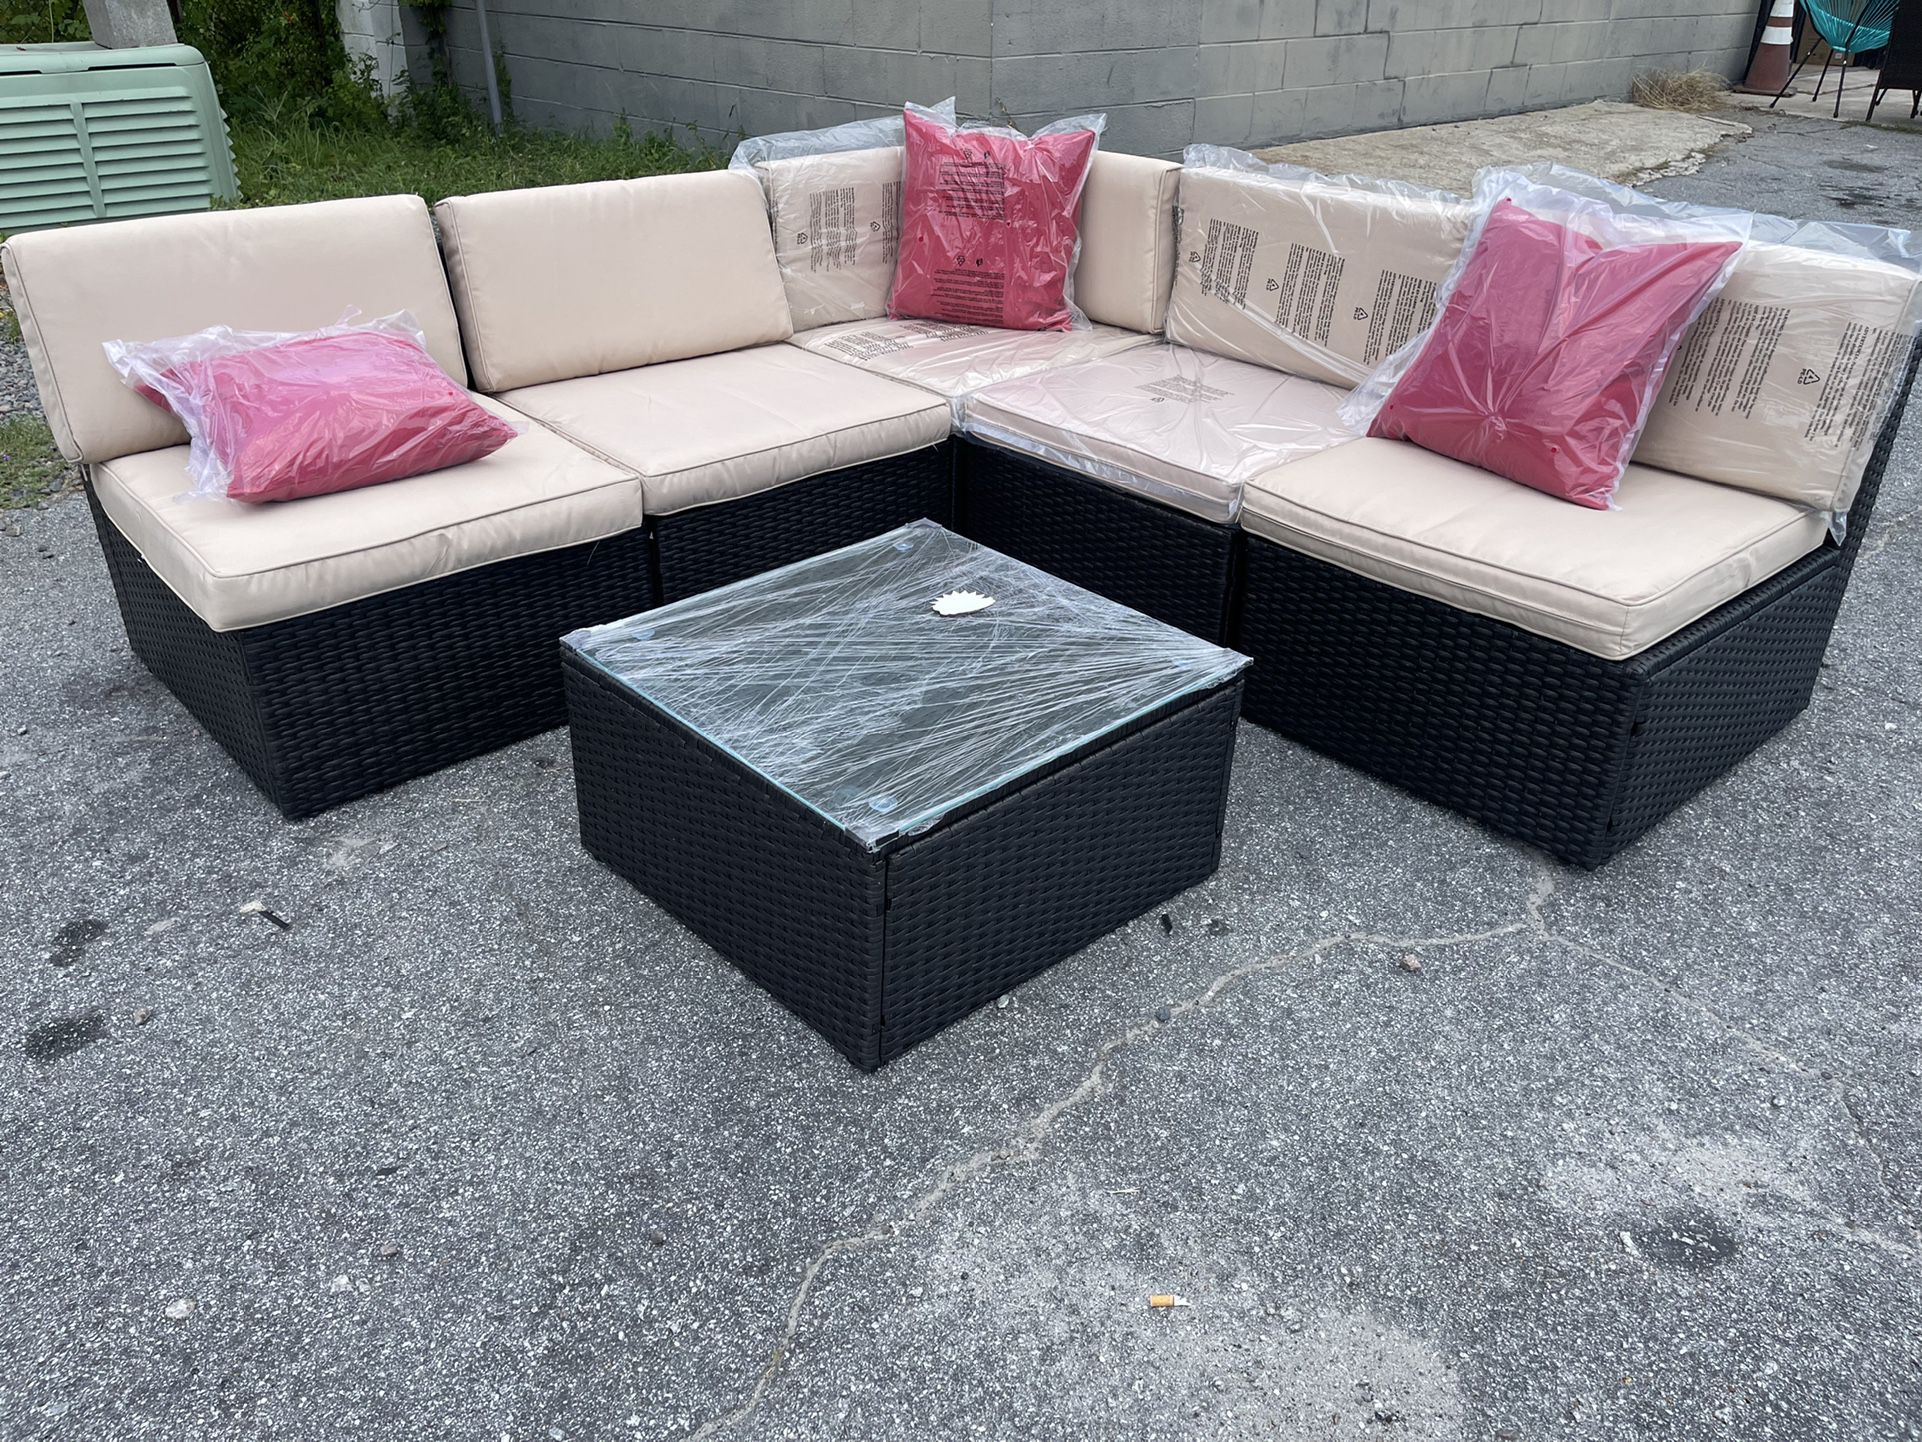 Sectional Patio Furniture Set Fully Assembled 